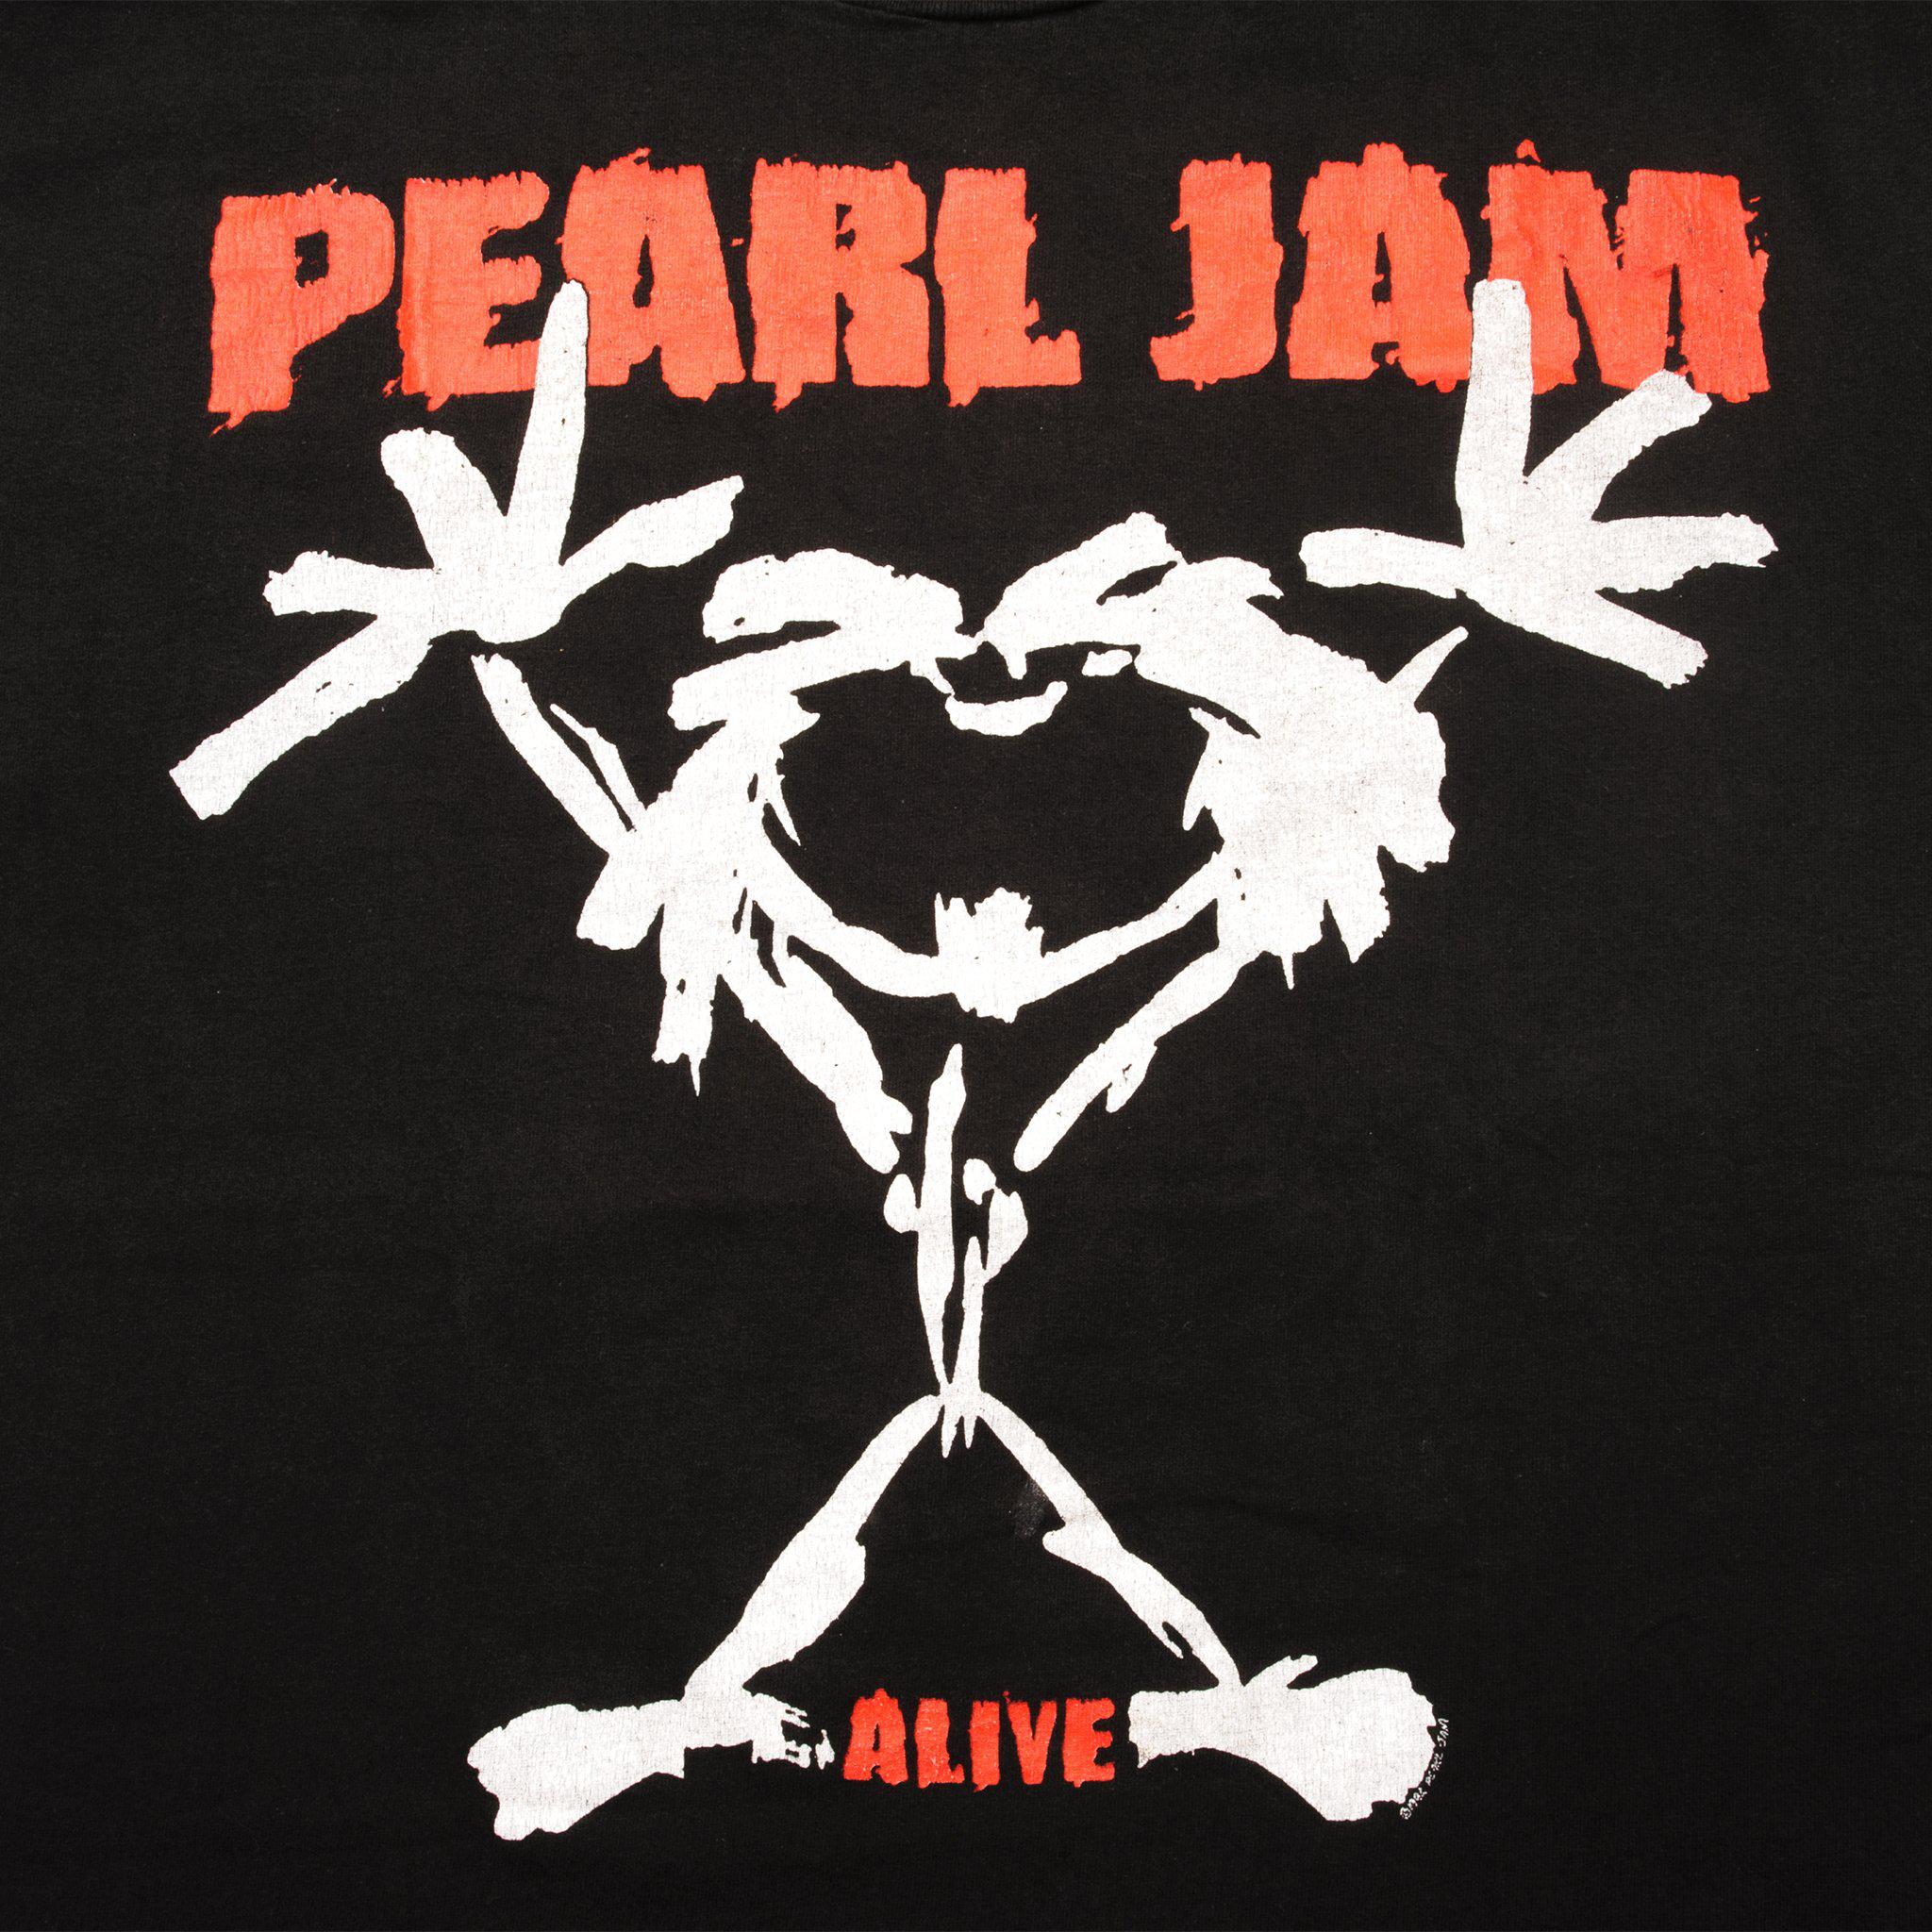  Pearl Jam 2018 t shirt baseball style seattle size xxx large  raglan eagle 8/08-8/10 the home shows : Collectibles & Fine Art